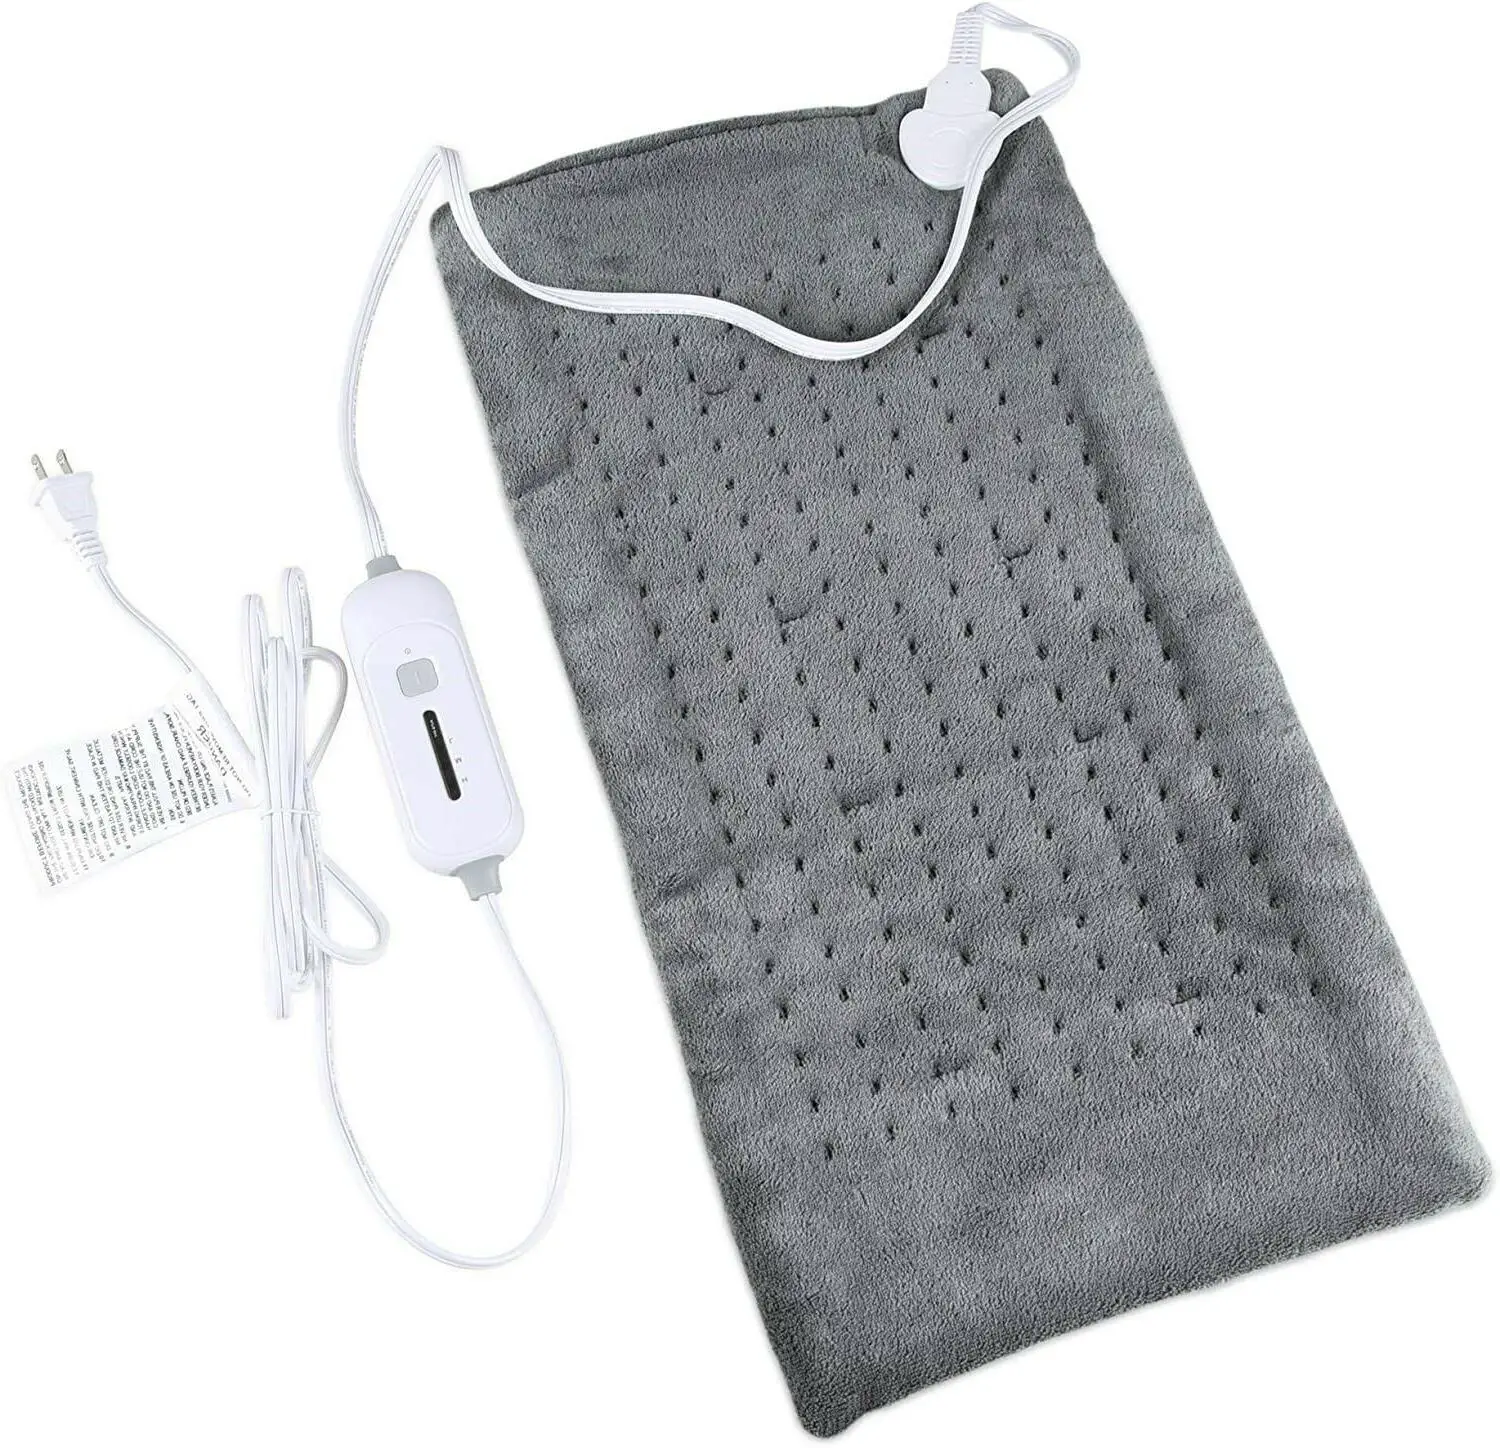 Mayerâs Best Heating Pads for Back Pain Relief